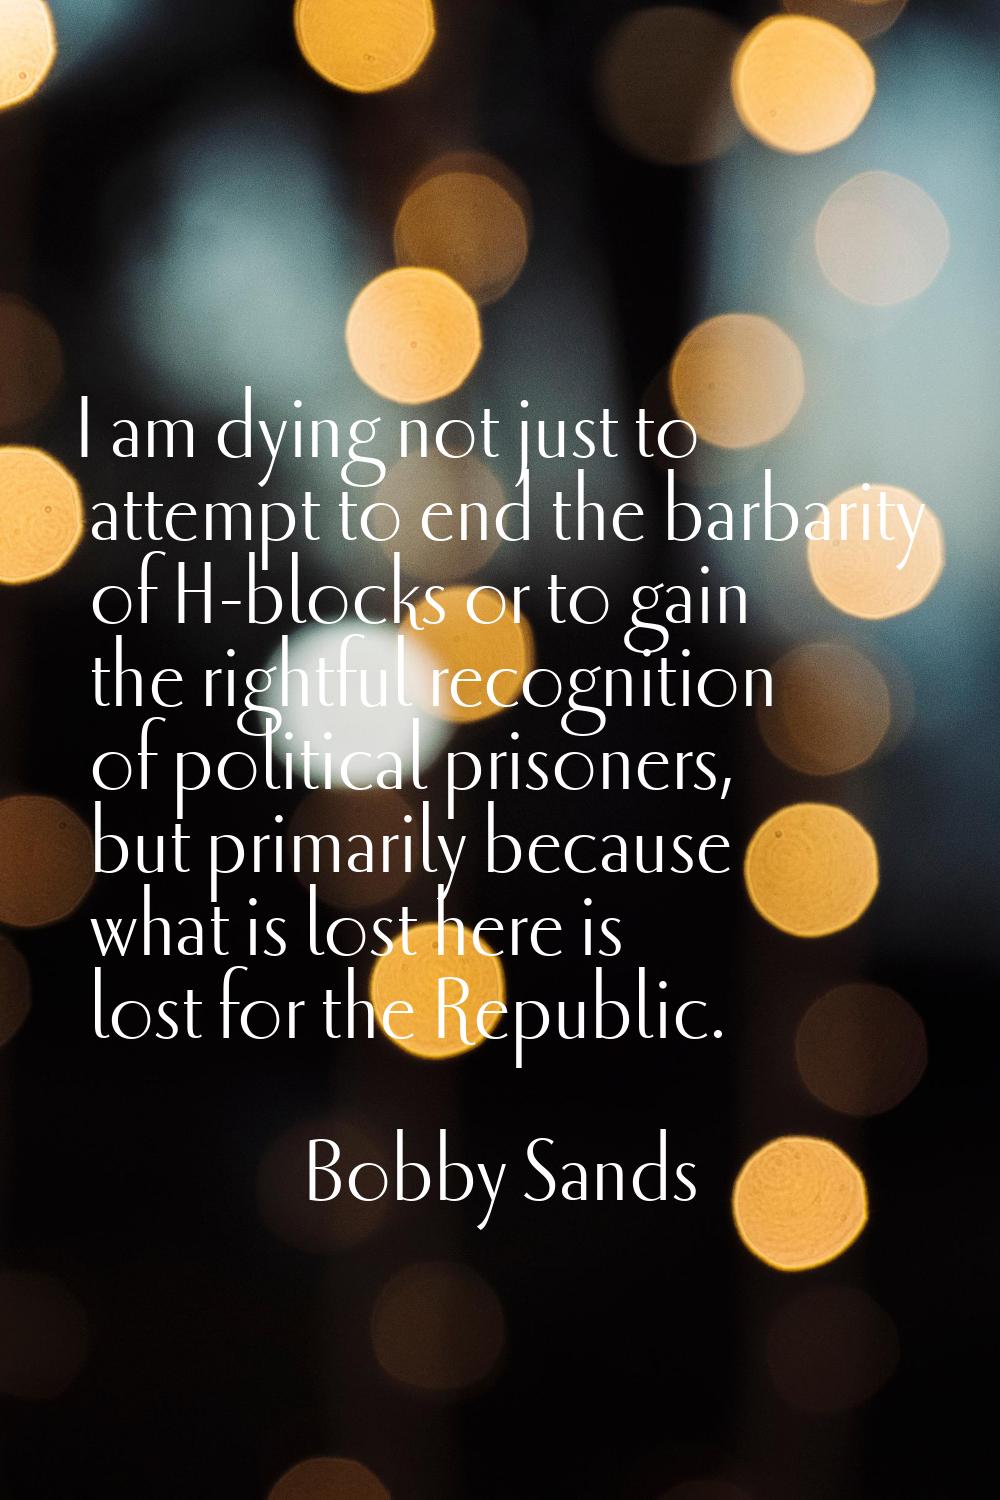 I am dying not just to attempt to end the barbarity of H-blocks or to gain the rightful recognition